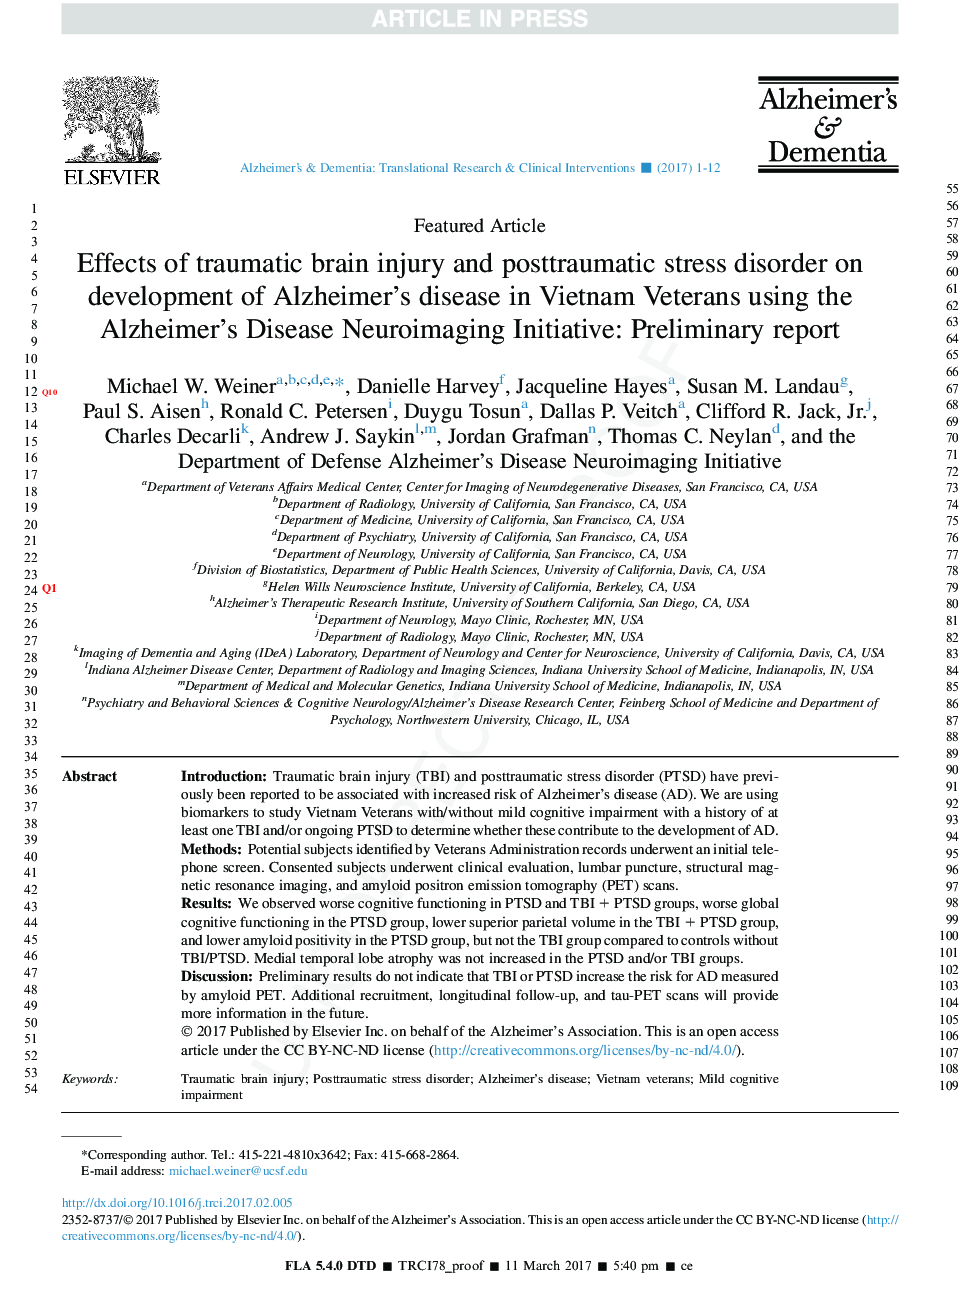 Effects of traumatic brain injury and posttraumatic stress disorder on development of Alzheimer's disease in Vietnam Veterans using the Alzheimer's Disease Neuroimaging Initiative: Preliminary report